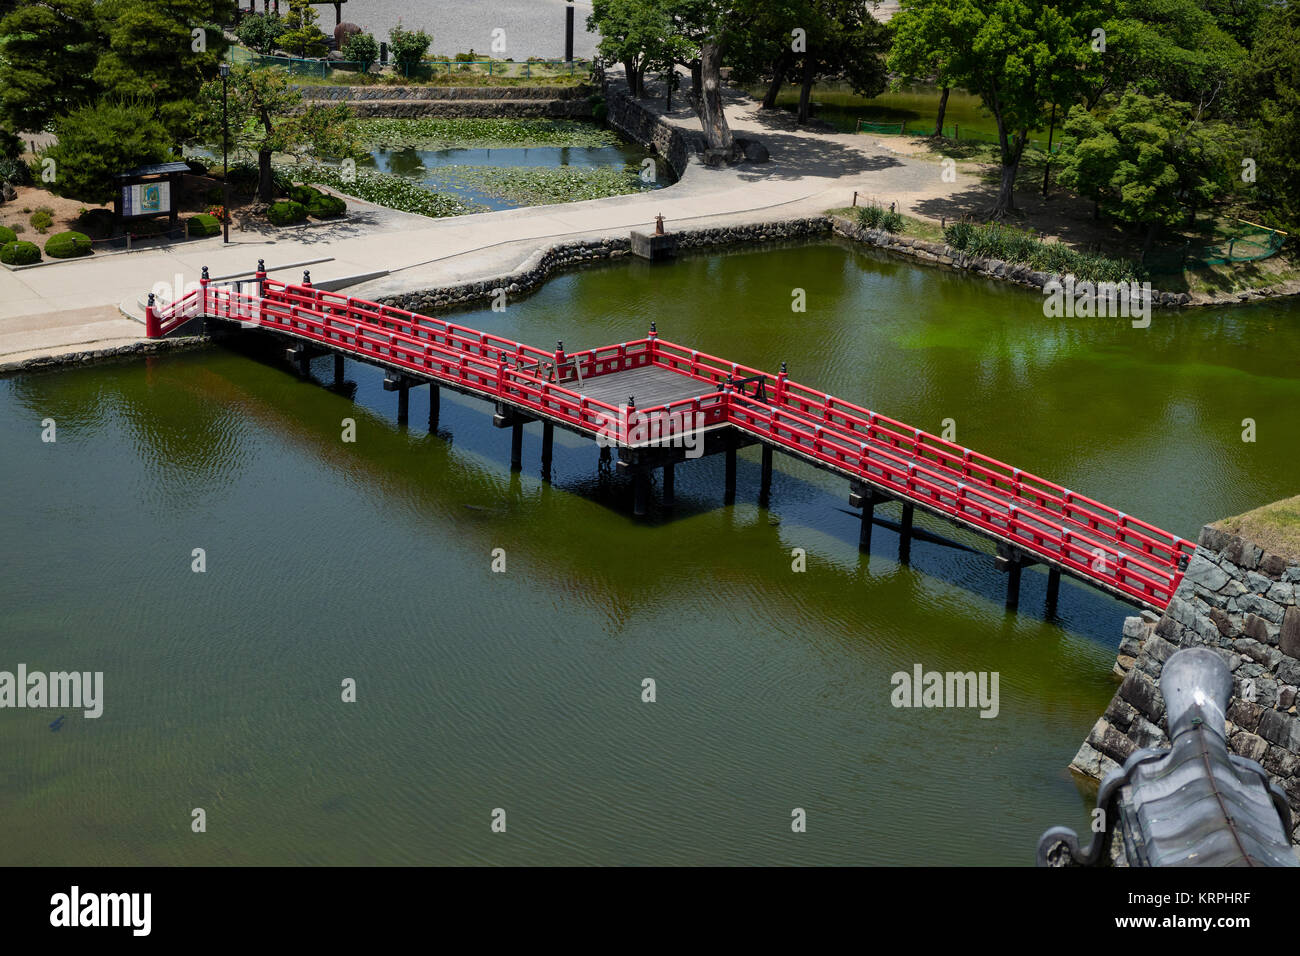 Matsumoto - Japan, June 6, 2017: Red bridge over the moat seen from the Castle Matsumoto also known as the Crow Castle. Stock Photo